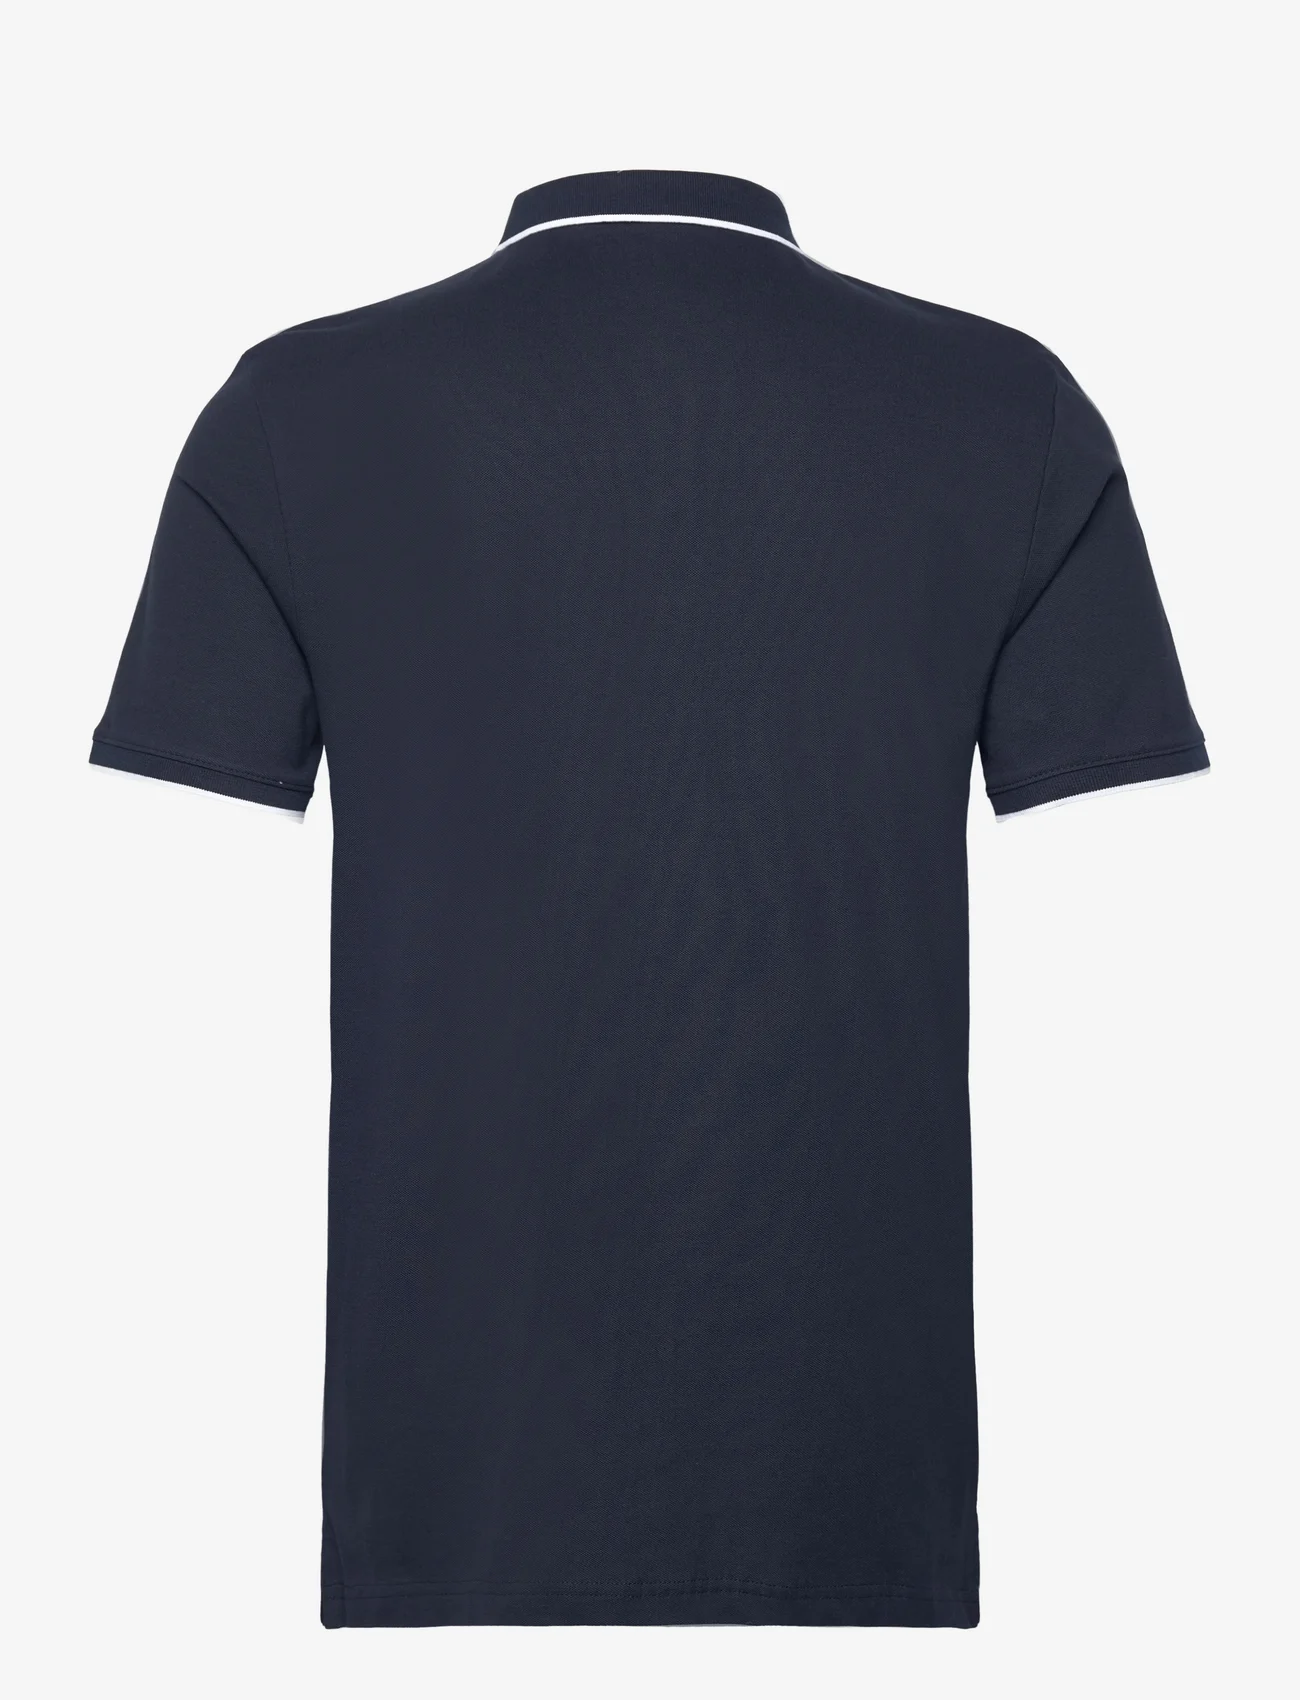 Tom Tailor - polo with tipping - lowest prices - navy - 1